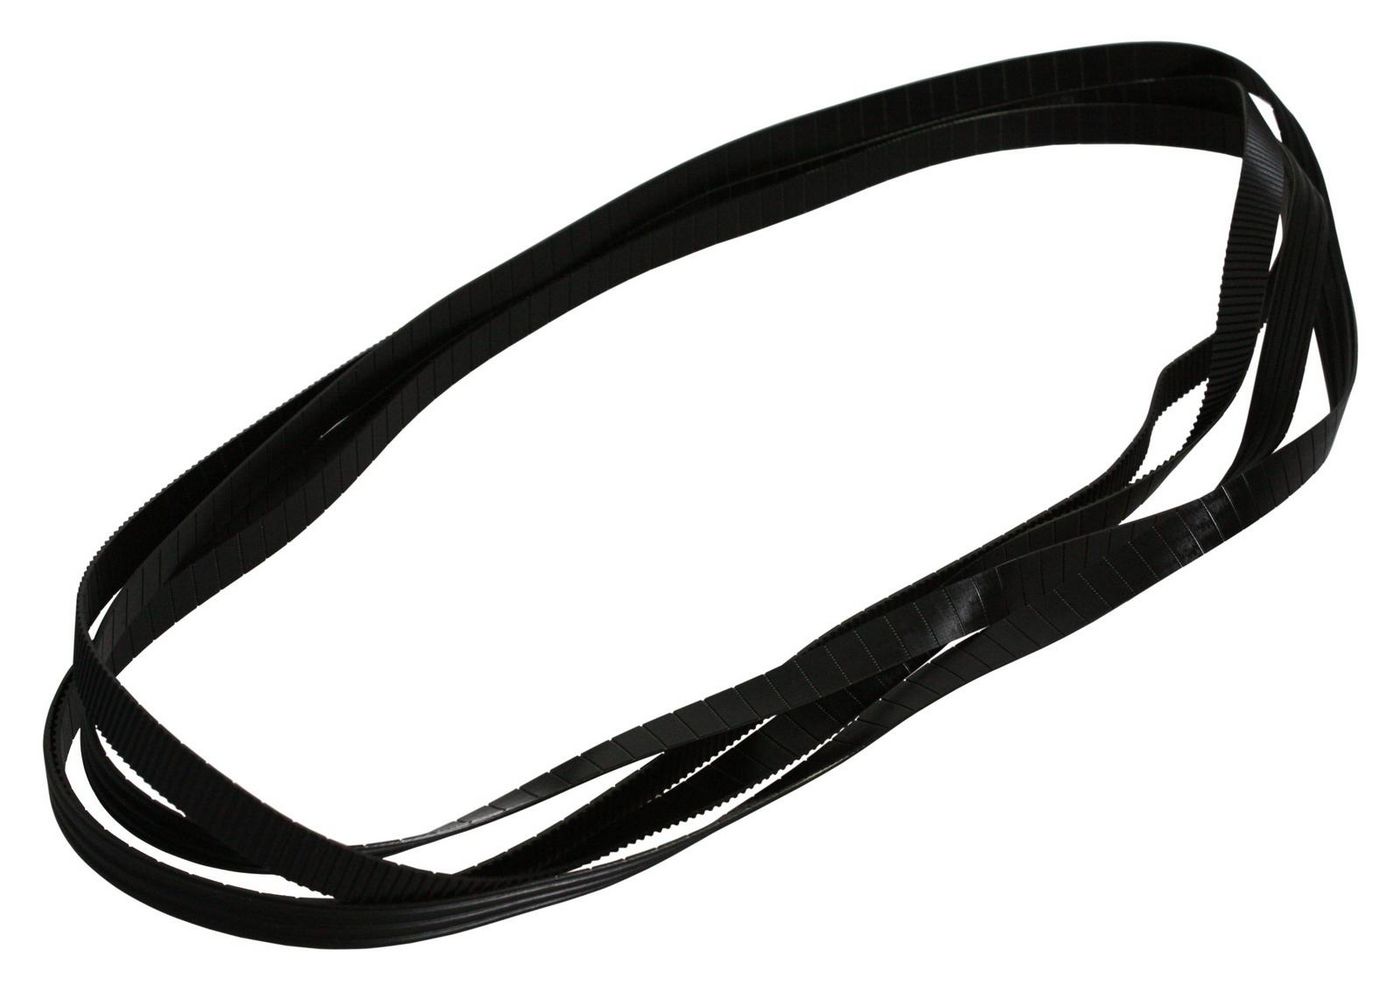 HP Carriage (scan-axis) belt